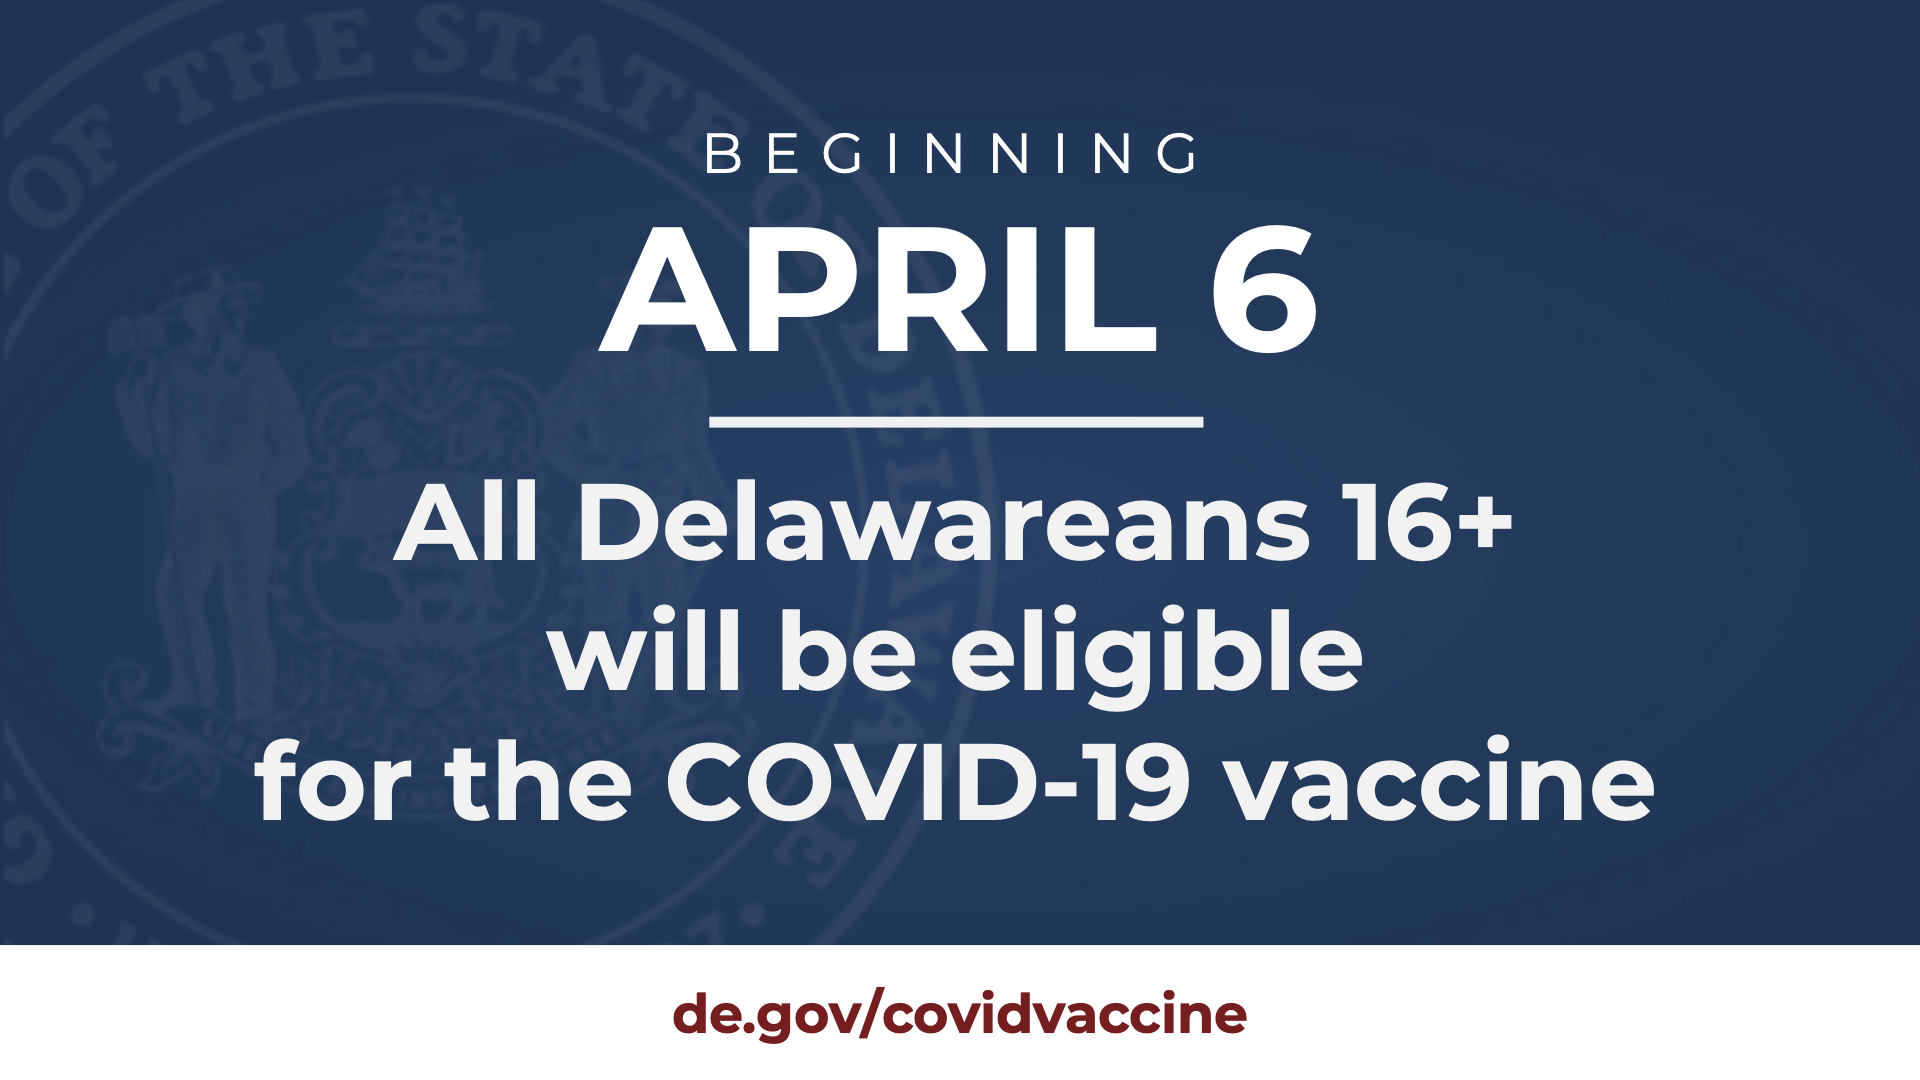 Beginning April 6, all Delawareans 16+ will be eligible for the COVID-19 Vaccine